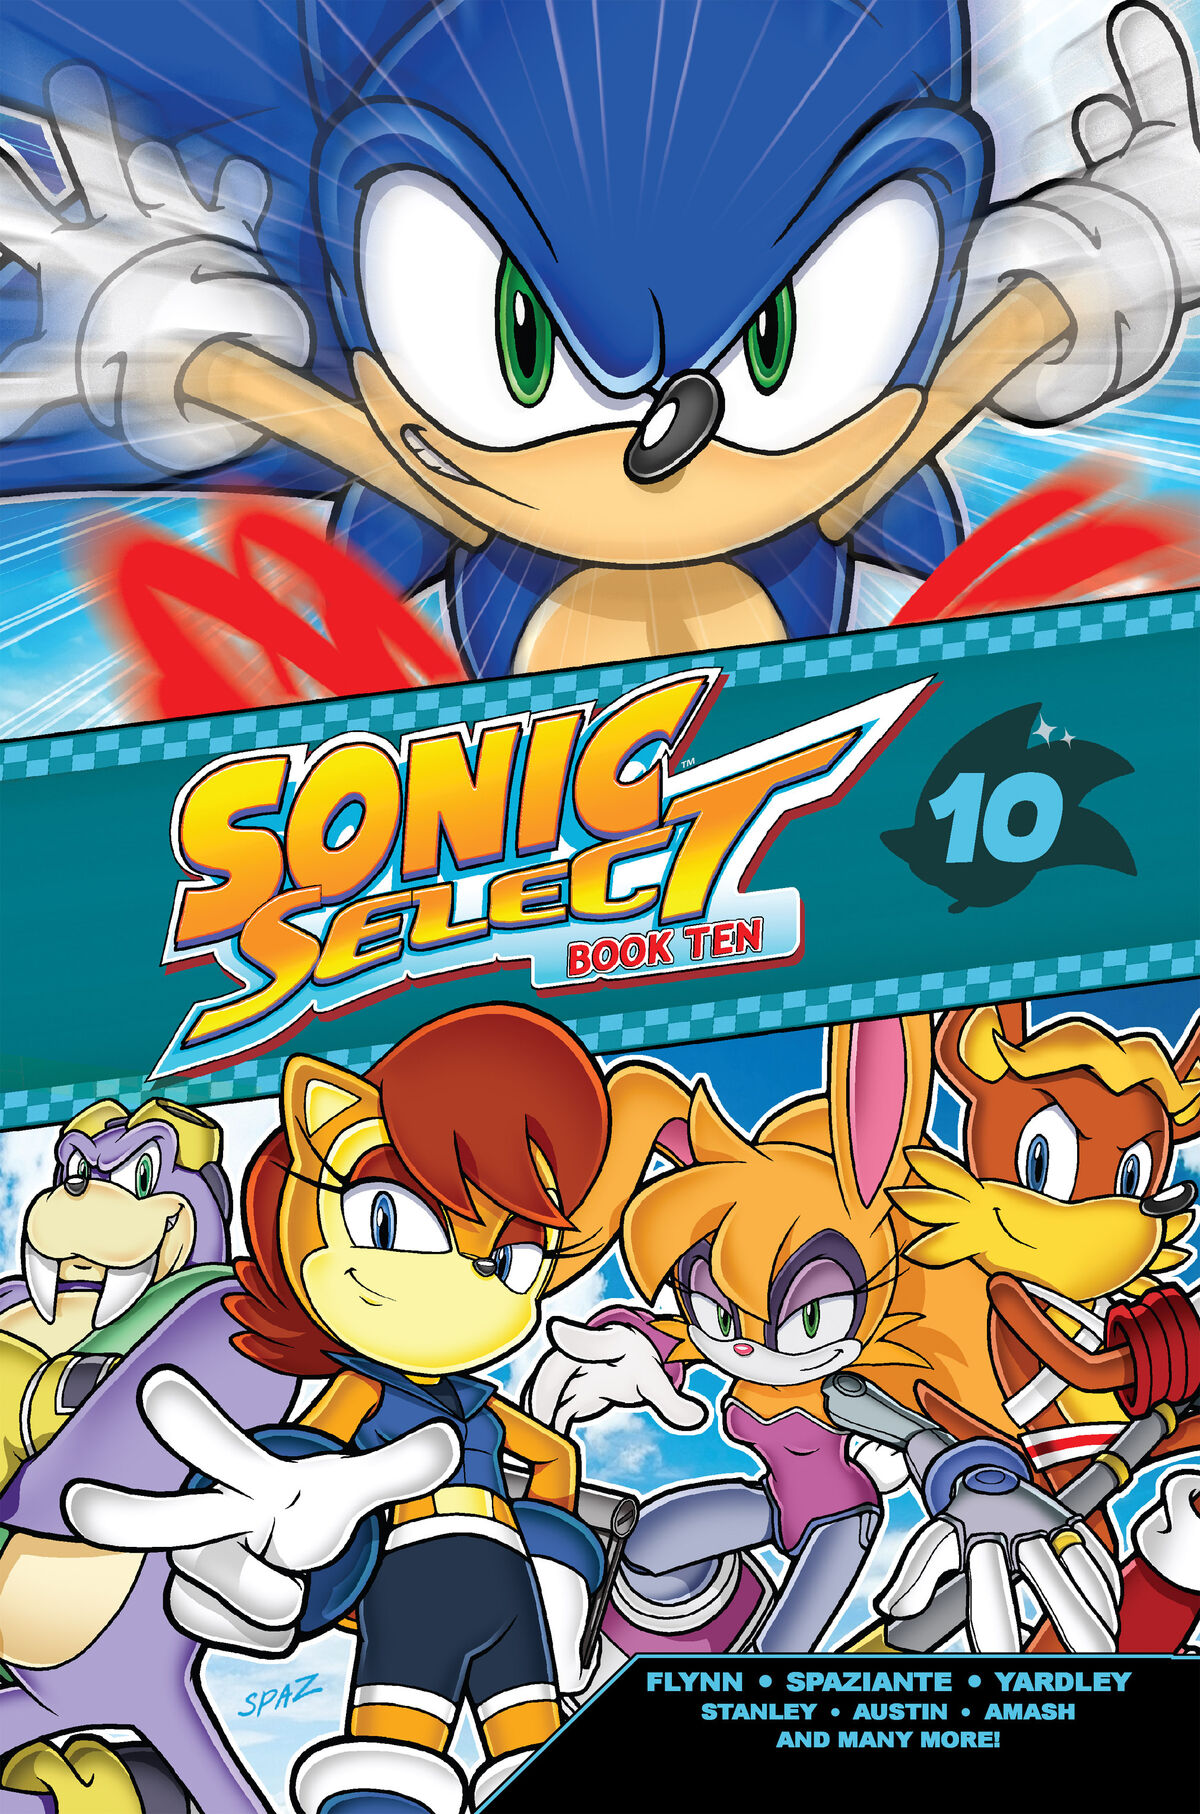 Sonic the Hedgehog Archives, Vol. 10 Book Review and Ratings by